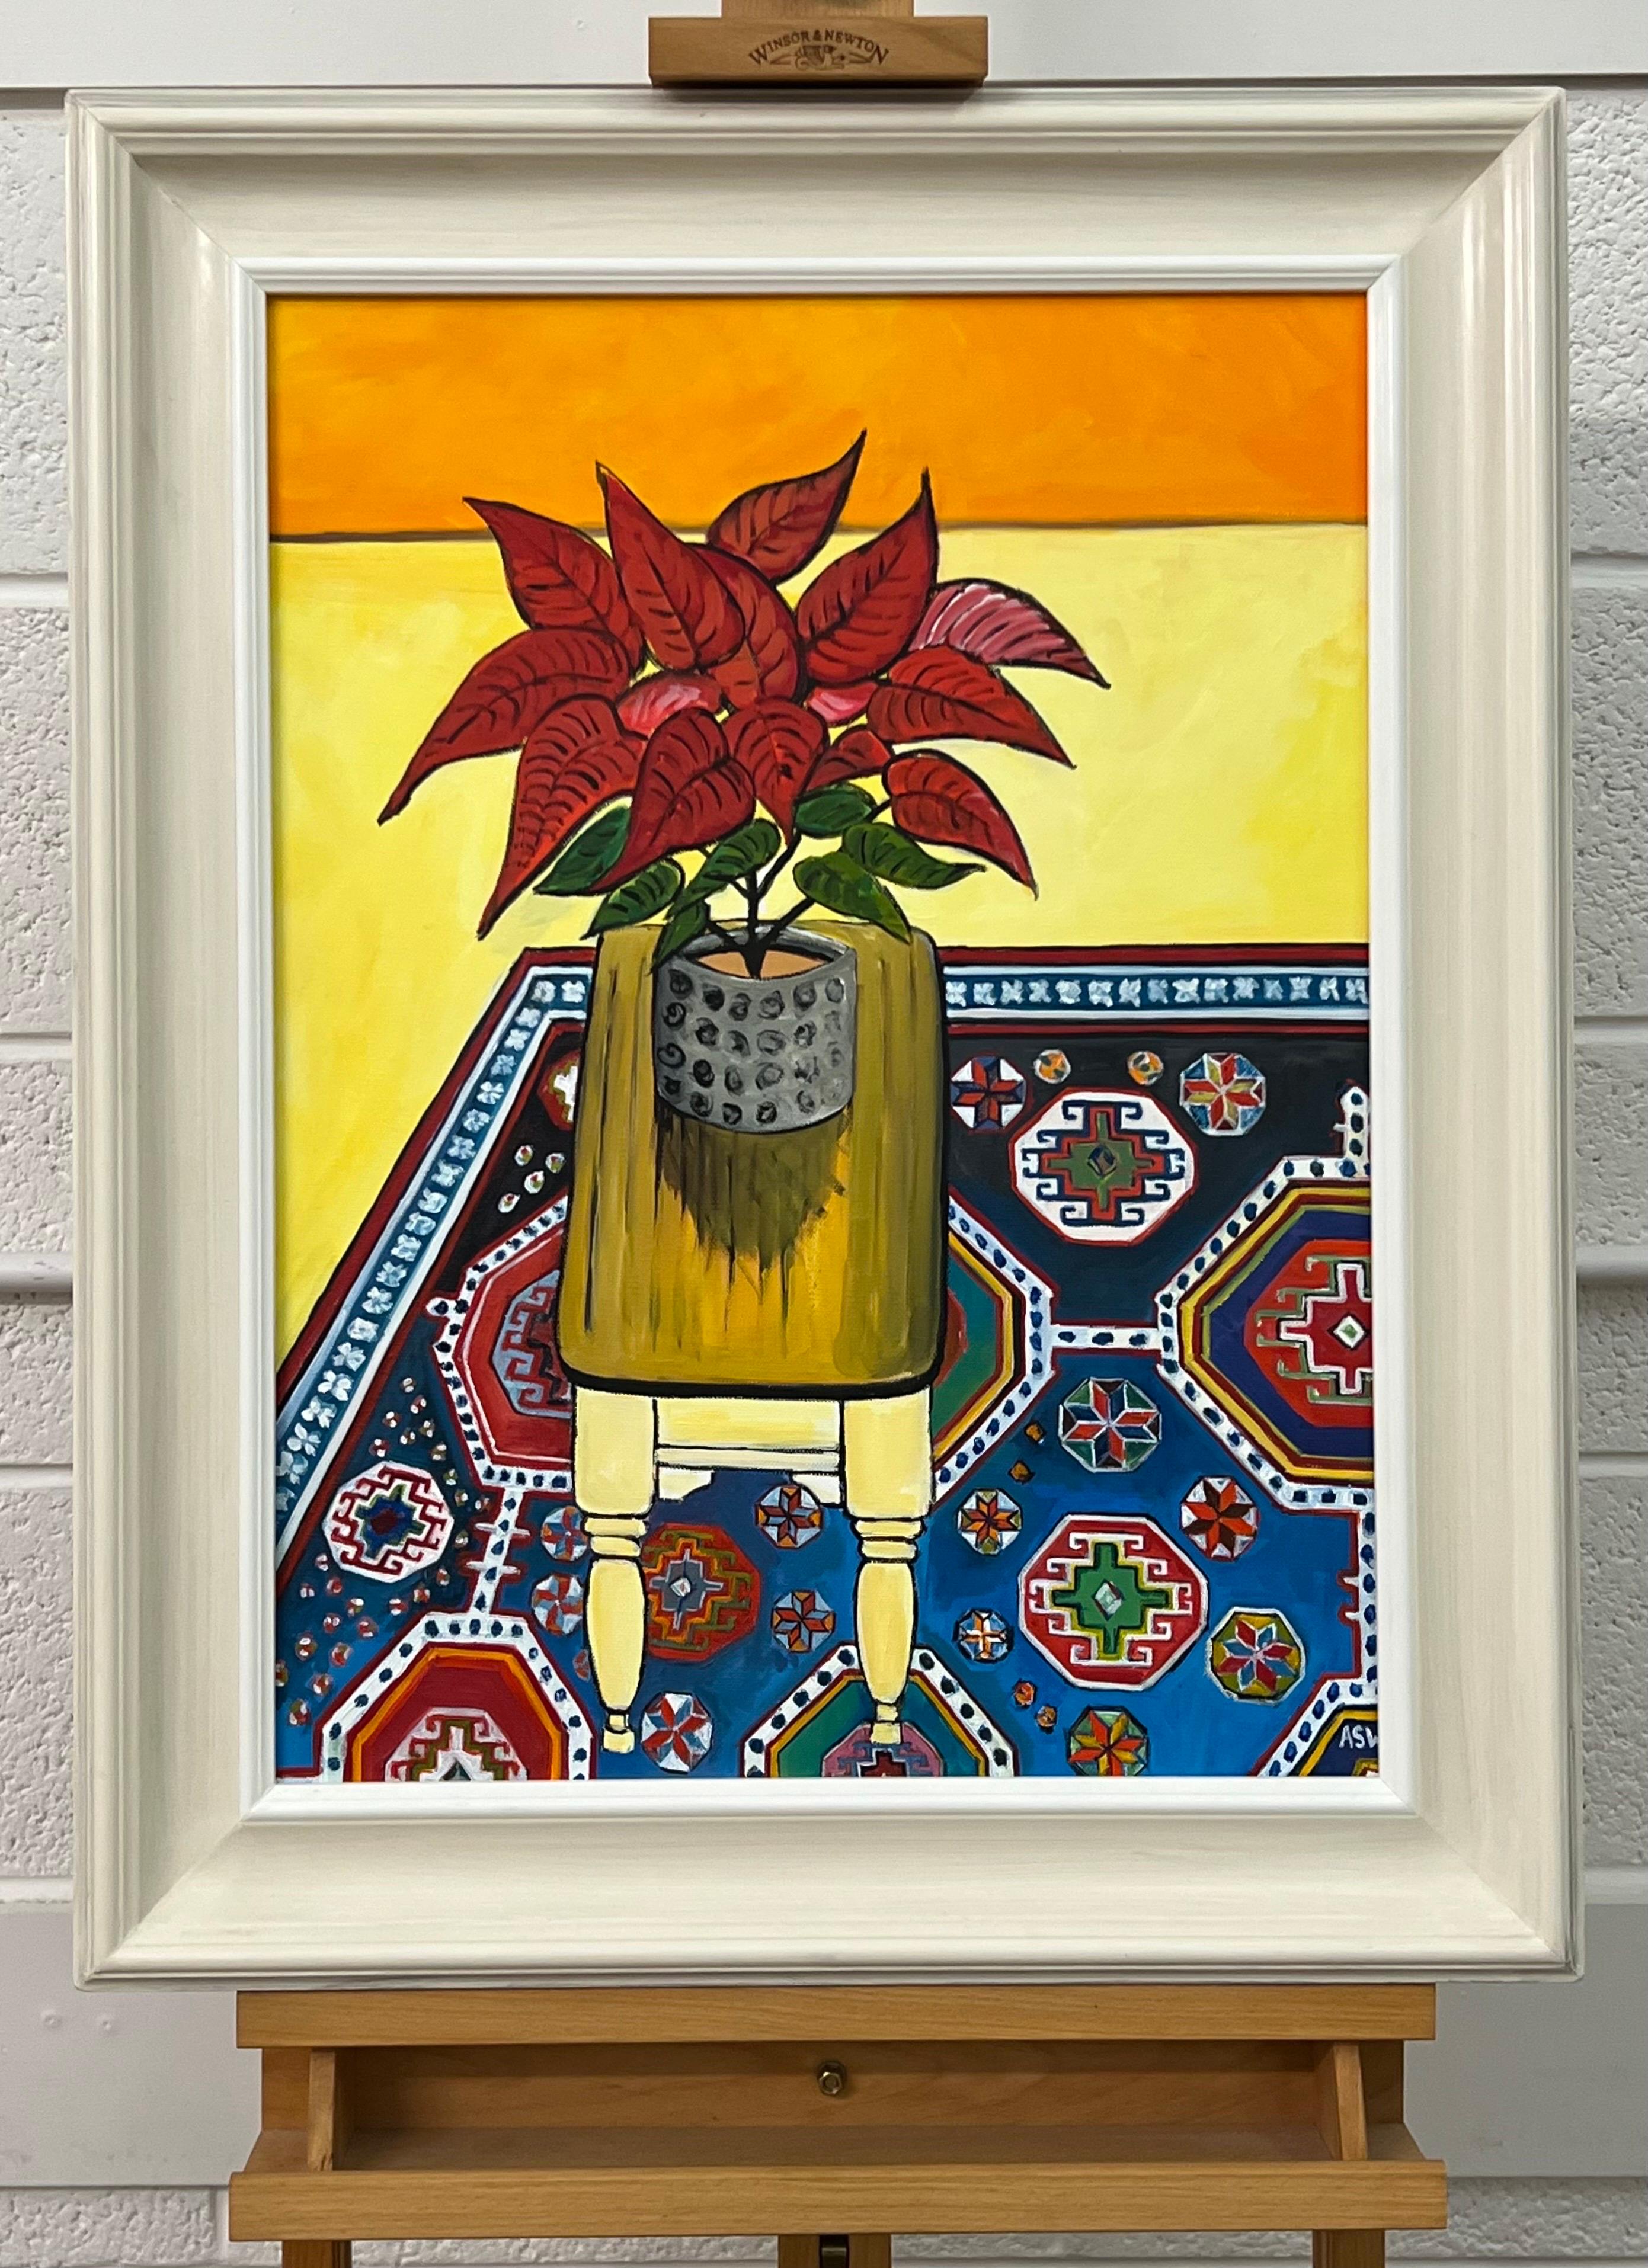 Still Life Painting of a Poinsettia Plant on a Persian Rug by Contemporary British Artist 

Art measures 18 x 24 inches
Frame measures 24 x 30 inches 

Angela Wakefield has twice been on the front cover of ‘Art of England’ and featured in ARTnews,